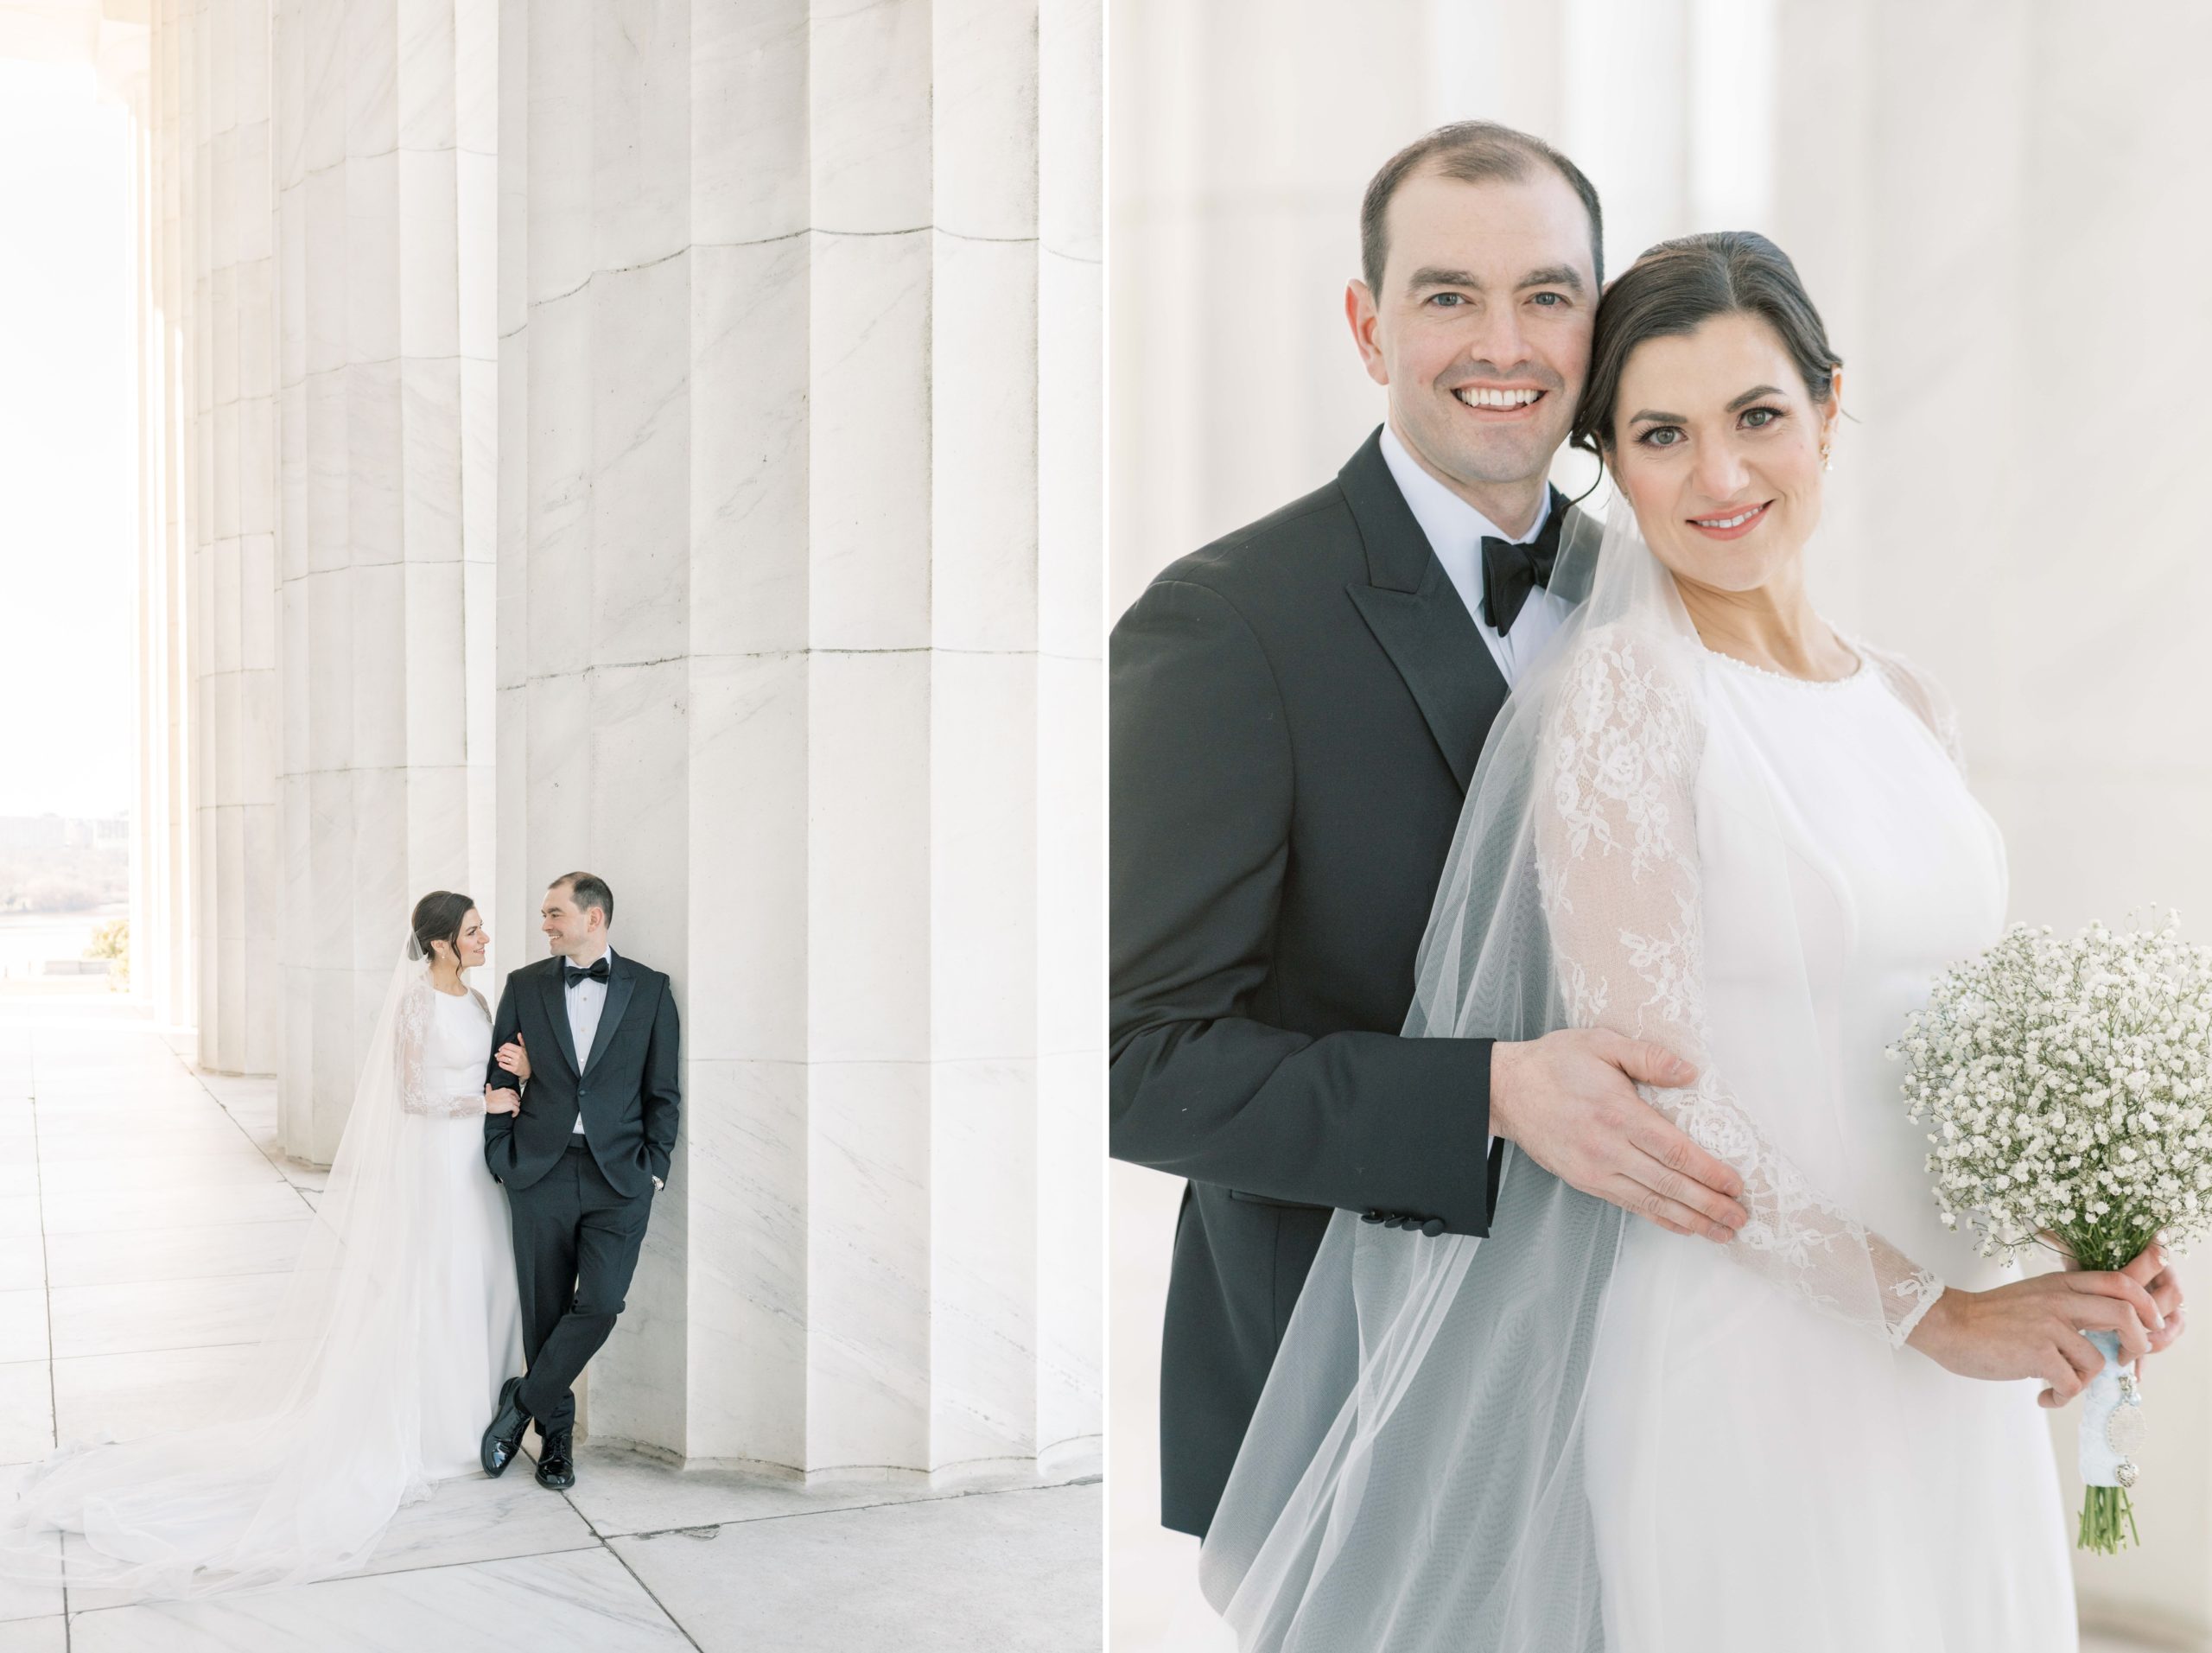 An intimate winter microwedding at St Dominic Church is Washington, DC followed by wedding portraits at the Lincoln Memorial.